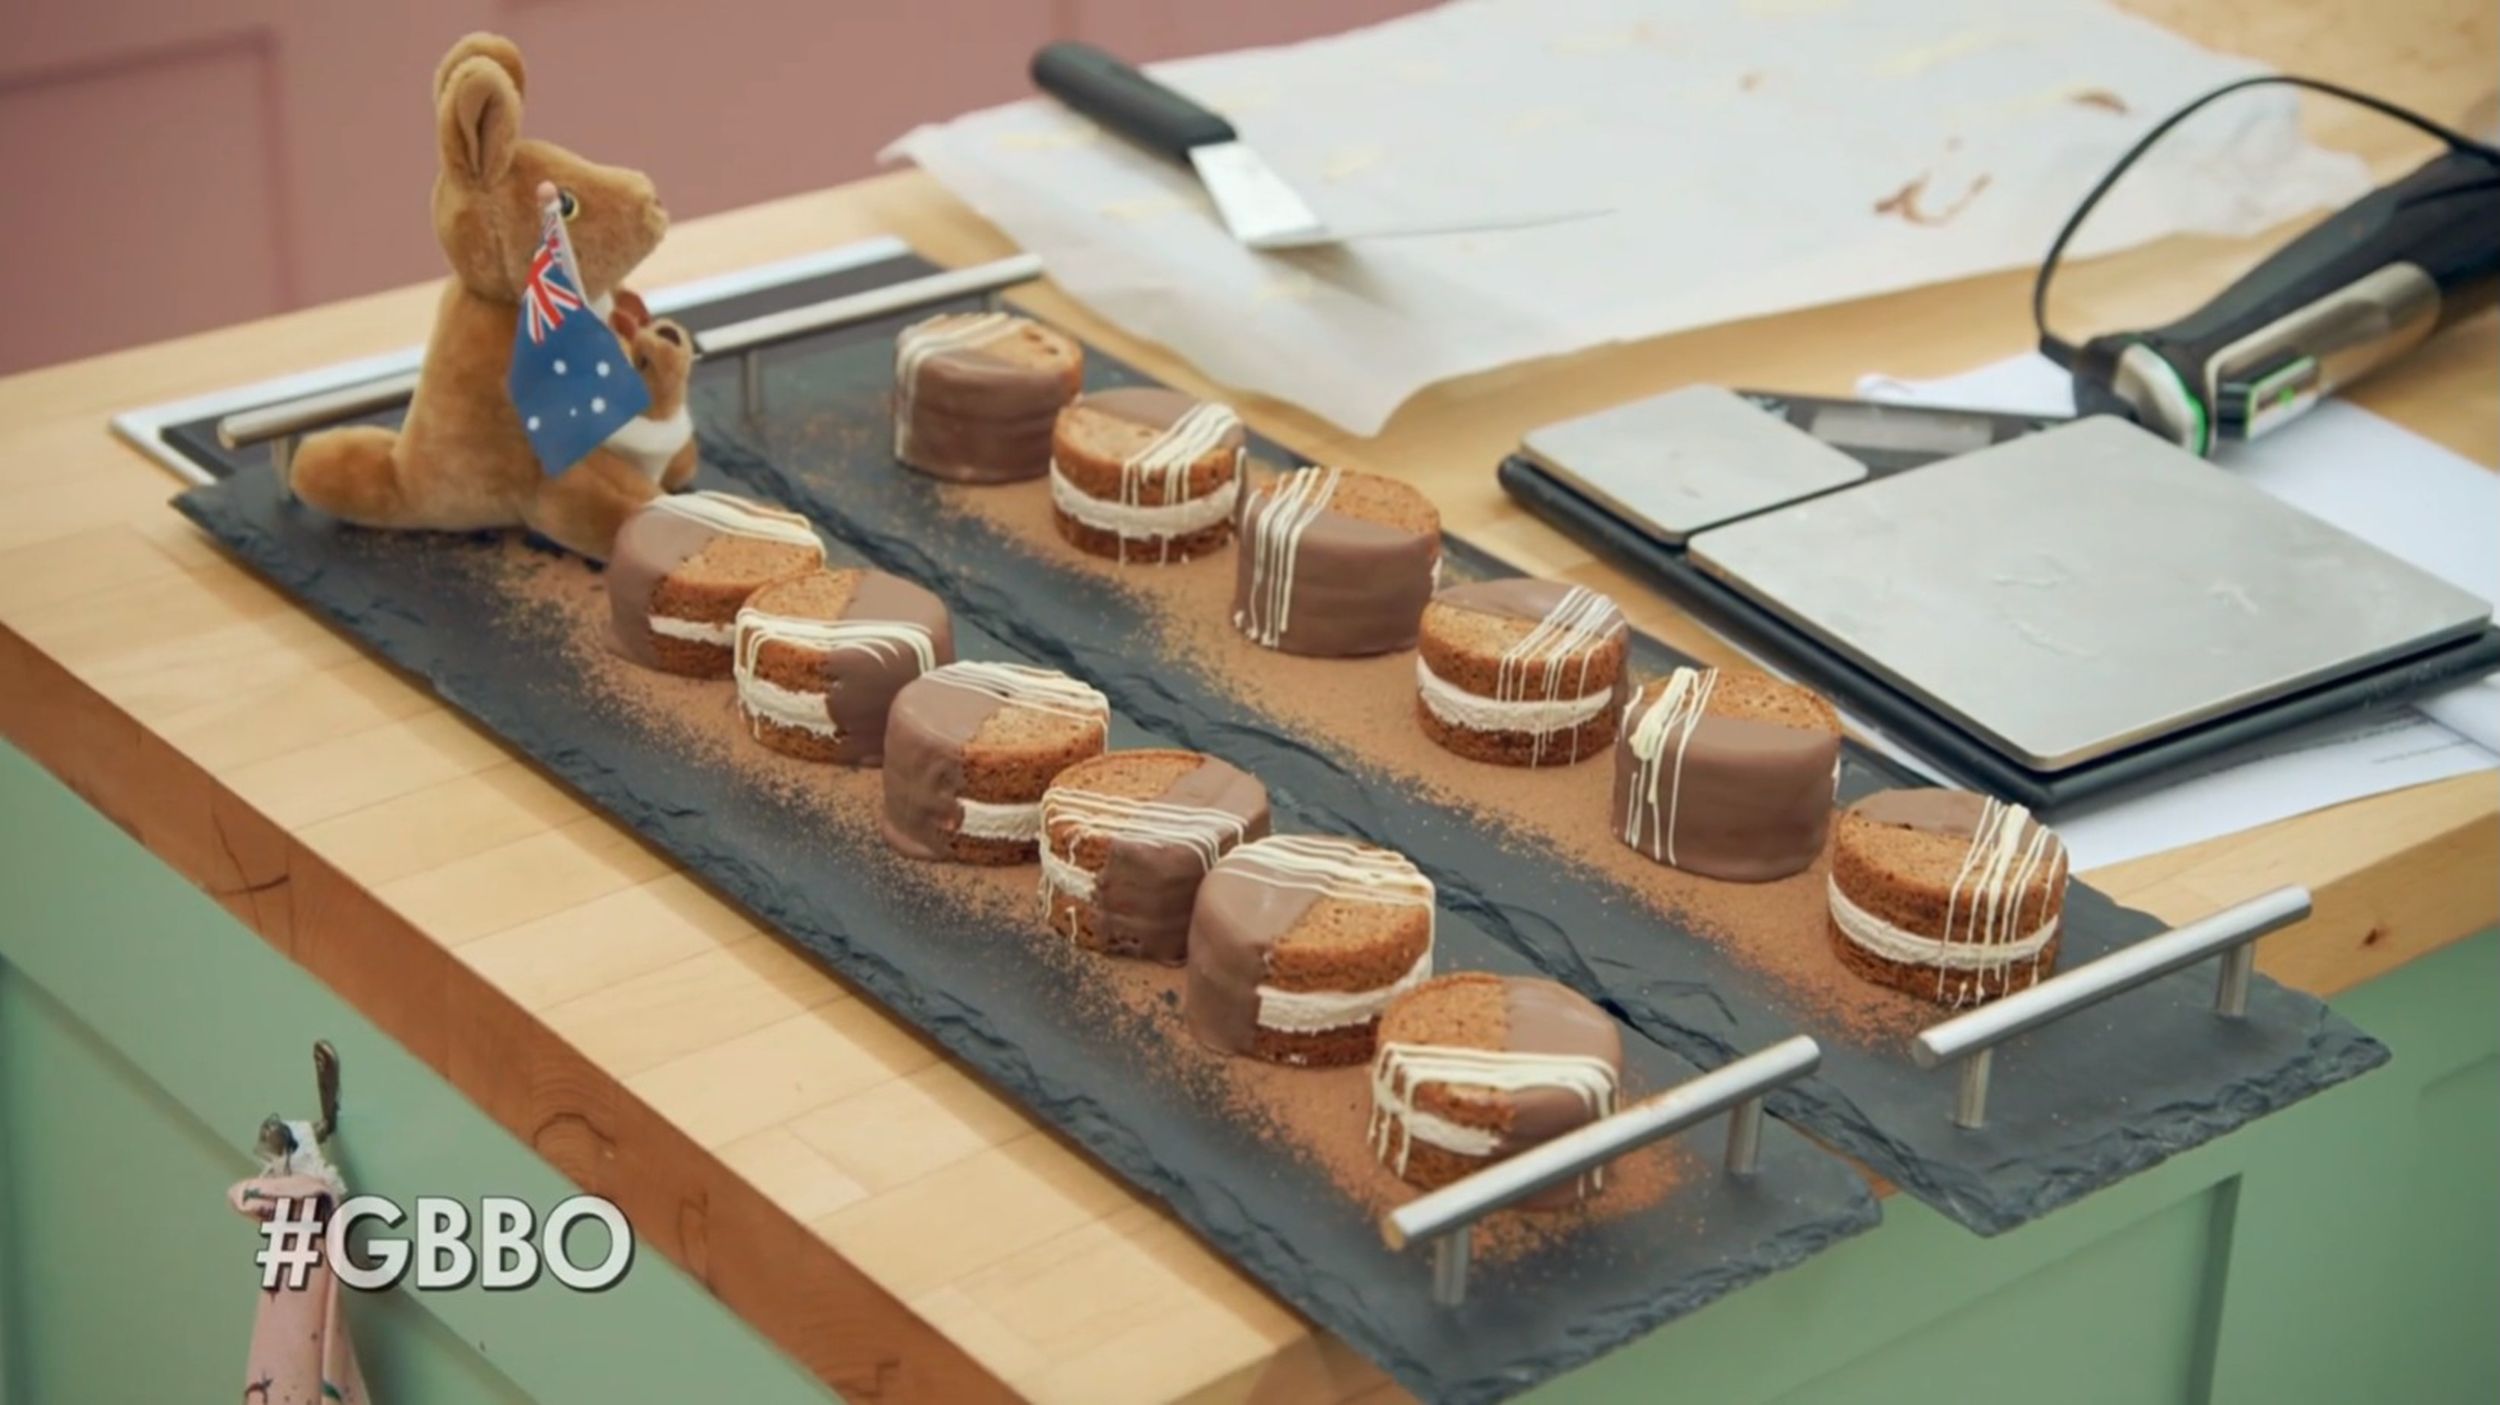 Tasha's After-School Treat Marshmallow Biscuits from the Biscuit Week Signature Challenge in 'The Great British Baking Show' Season 14